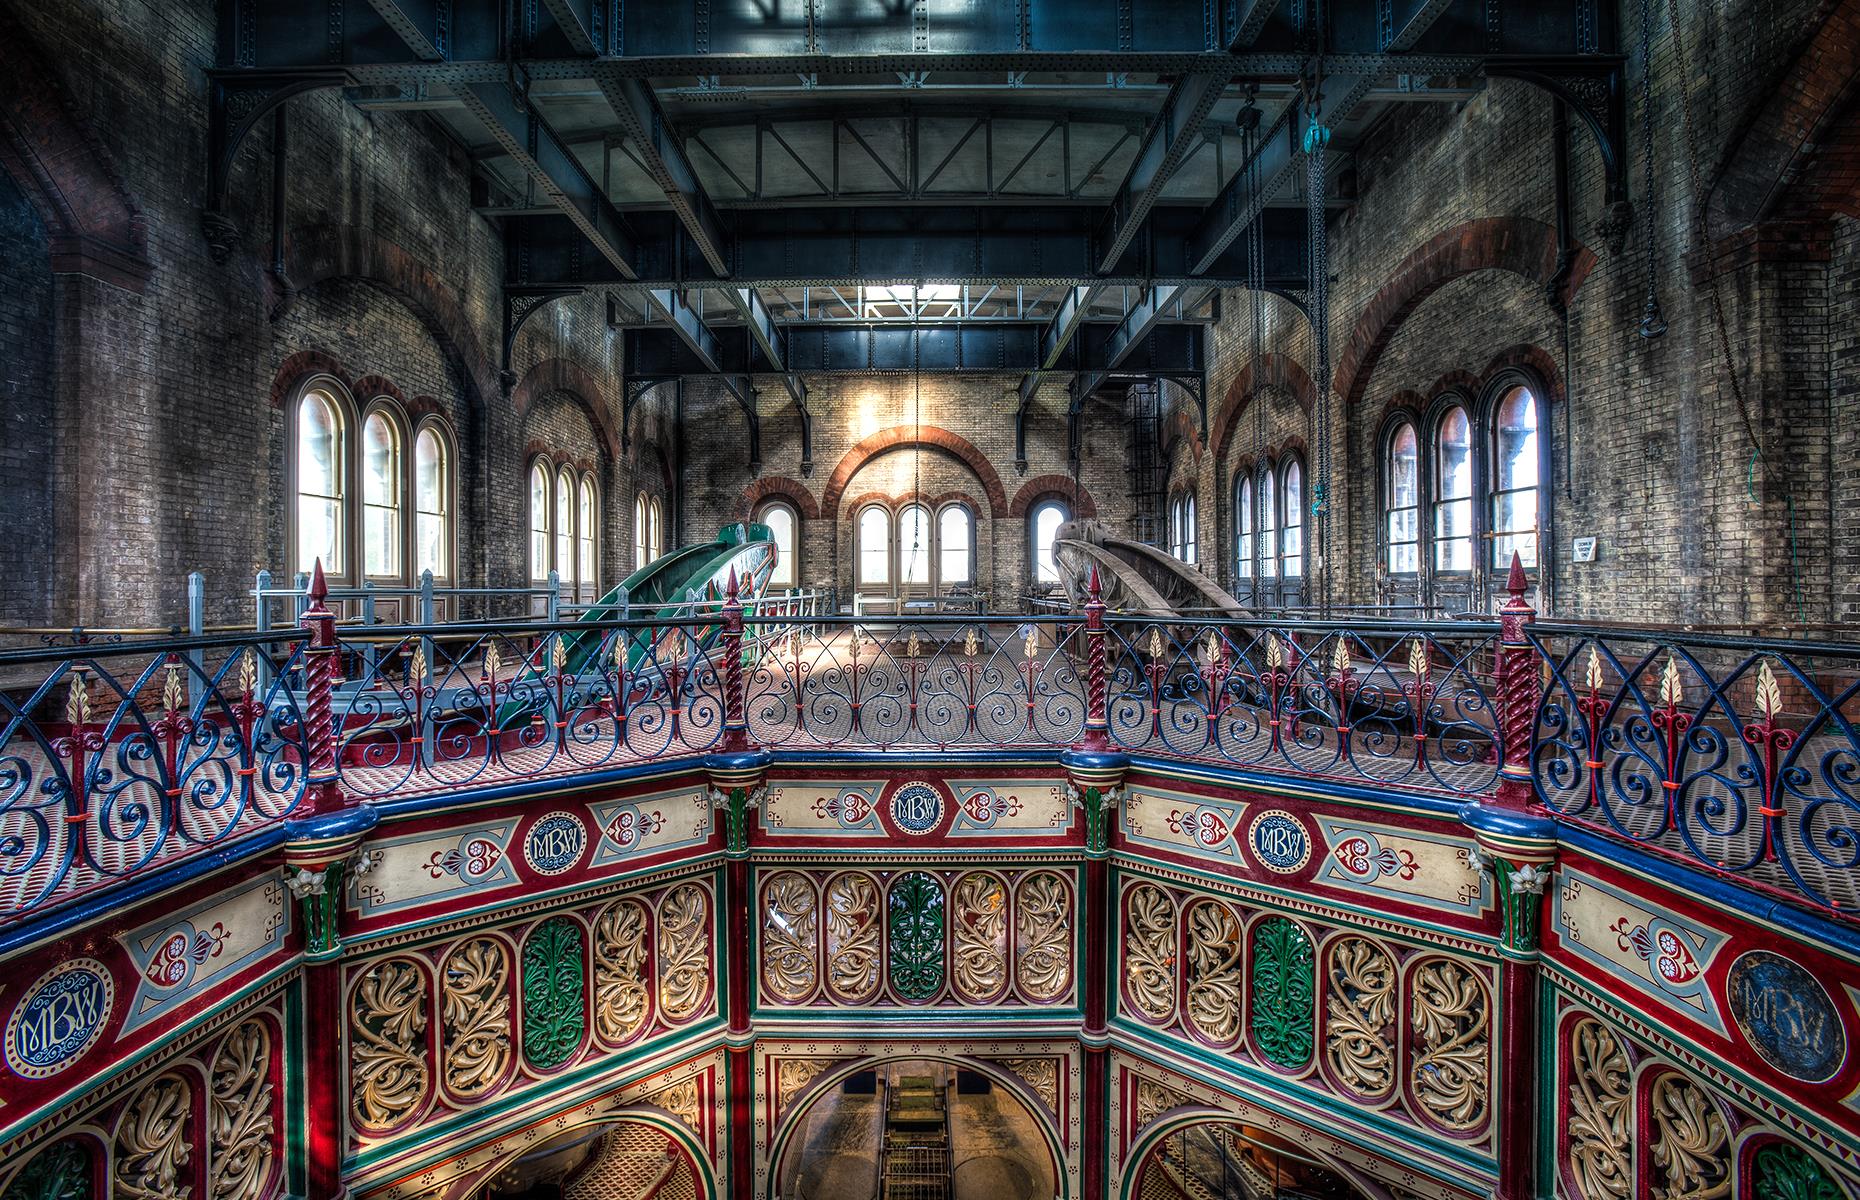 <p>It's hard to believe that this intricate, Victorian-era building was actually a sewage works: so impressive was the colorful ironwork at Crossness Pumping Station that it was nicknamed the "Cathedral on the Marsh". Built as an antidote to London's "Great Stink" in the 1850s, the station was in operation right up until the 1950s, when it was decommissioned and eventually deserted. <a href="https://www.crossness.org.uk/">Tours of the abandoned pumping station</a> are typically on offer, though they're paused due to COVID-19.</p>